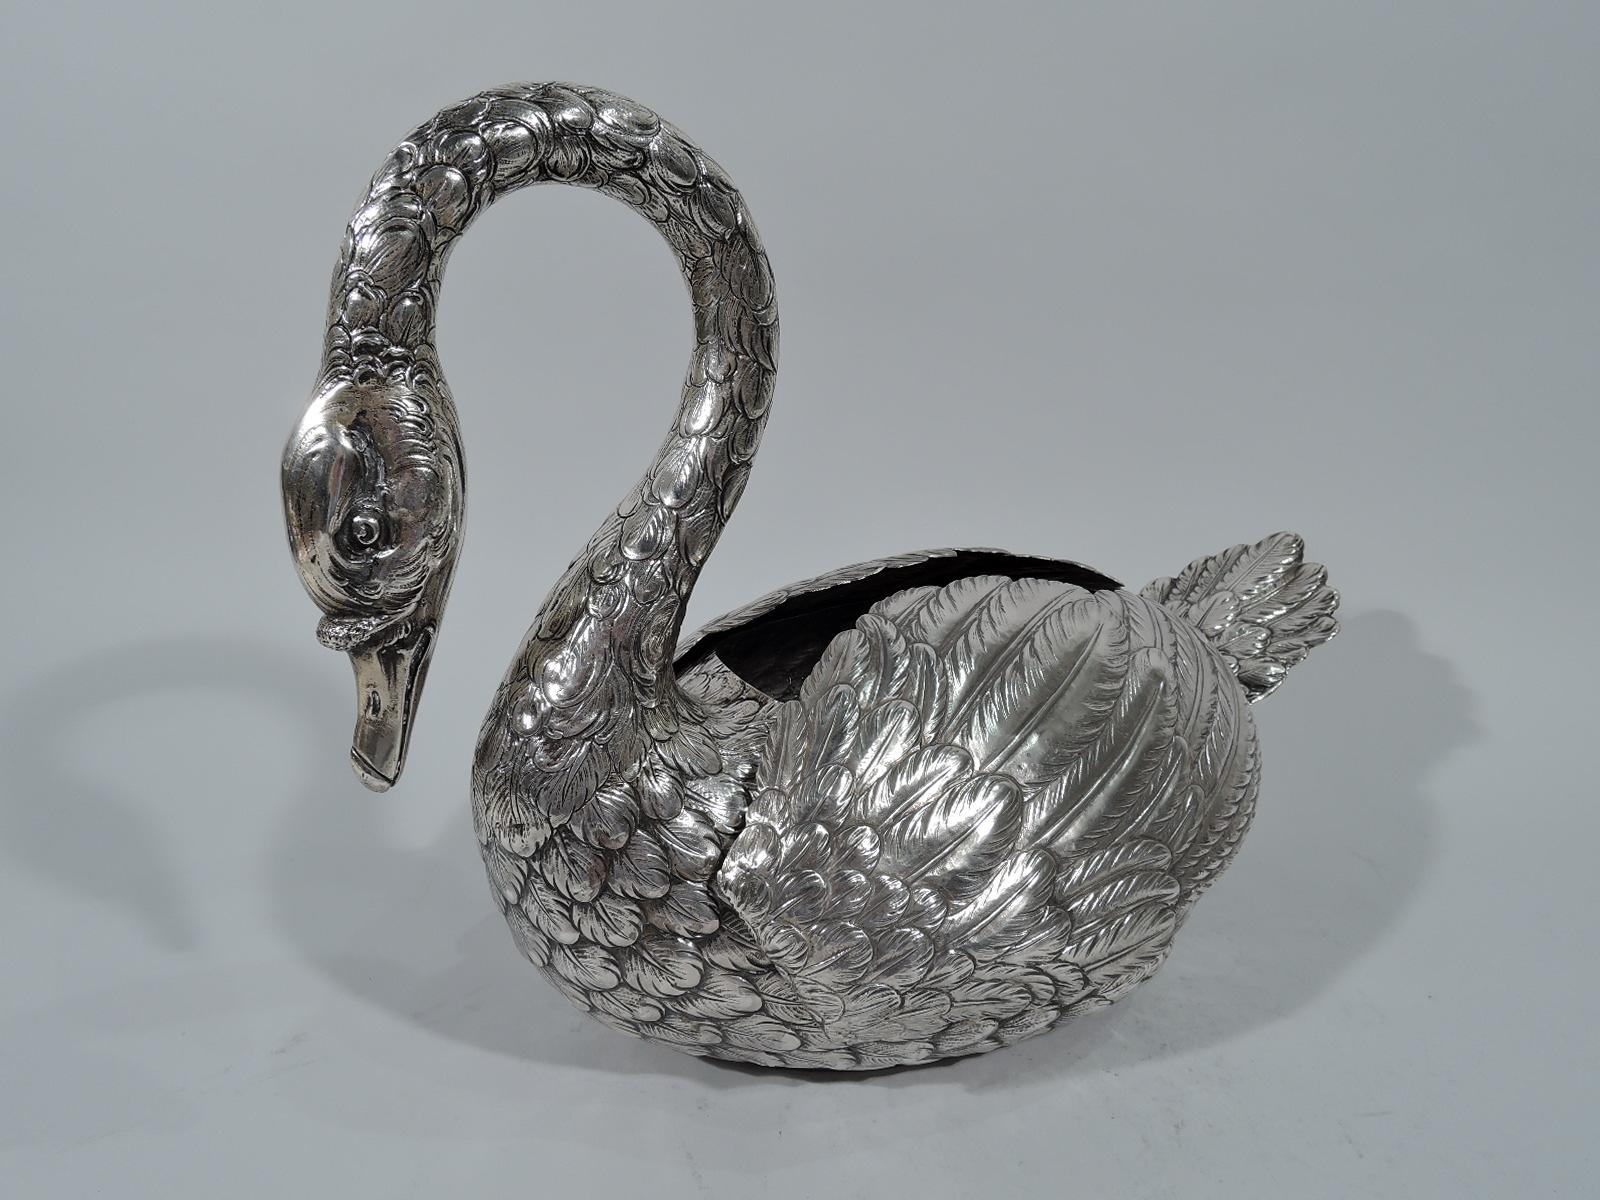 Delightful antique German sterling silver swan. A big bird with scrolled neck terminating in closed bill and erect tail feathers. Finely engraved feathers and hinged plumy wings that can be opened to suggest flight. A fabulous centerpiece with